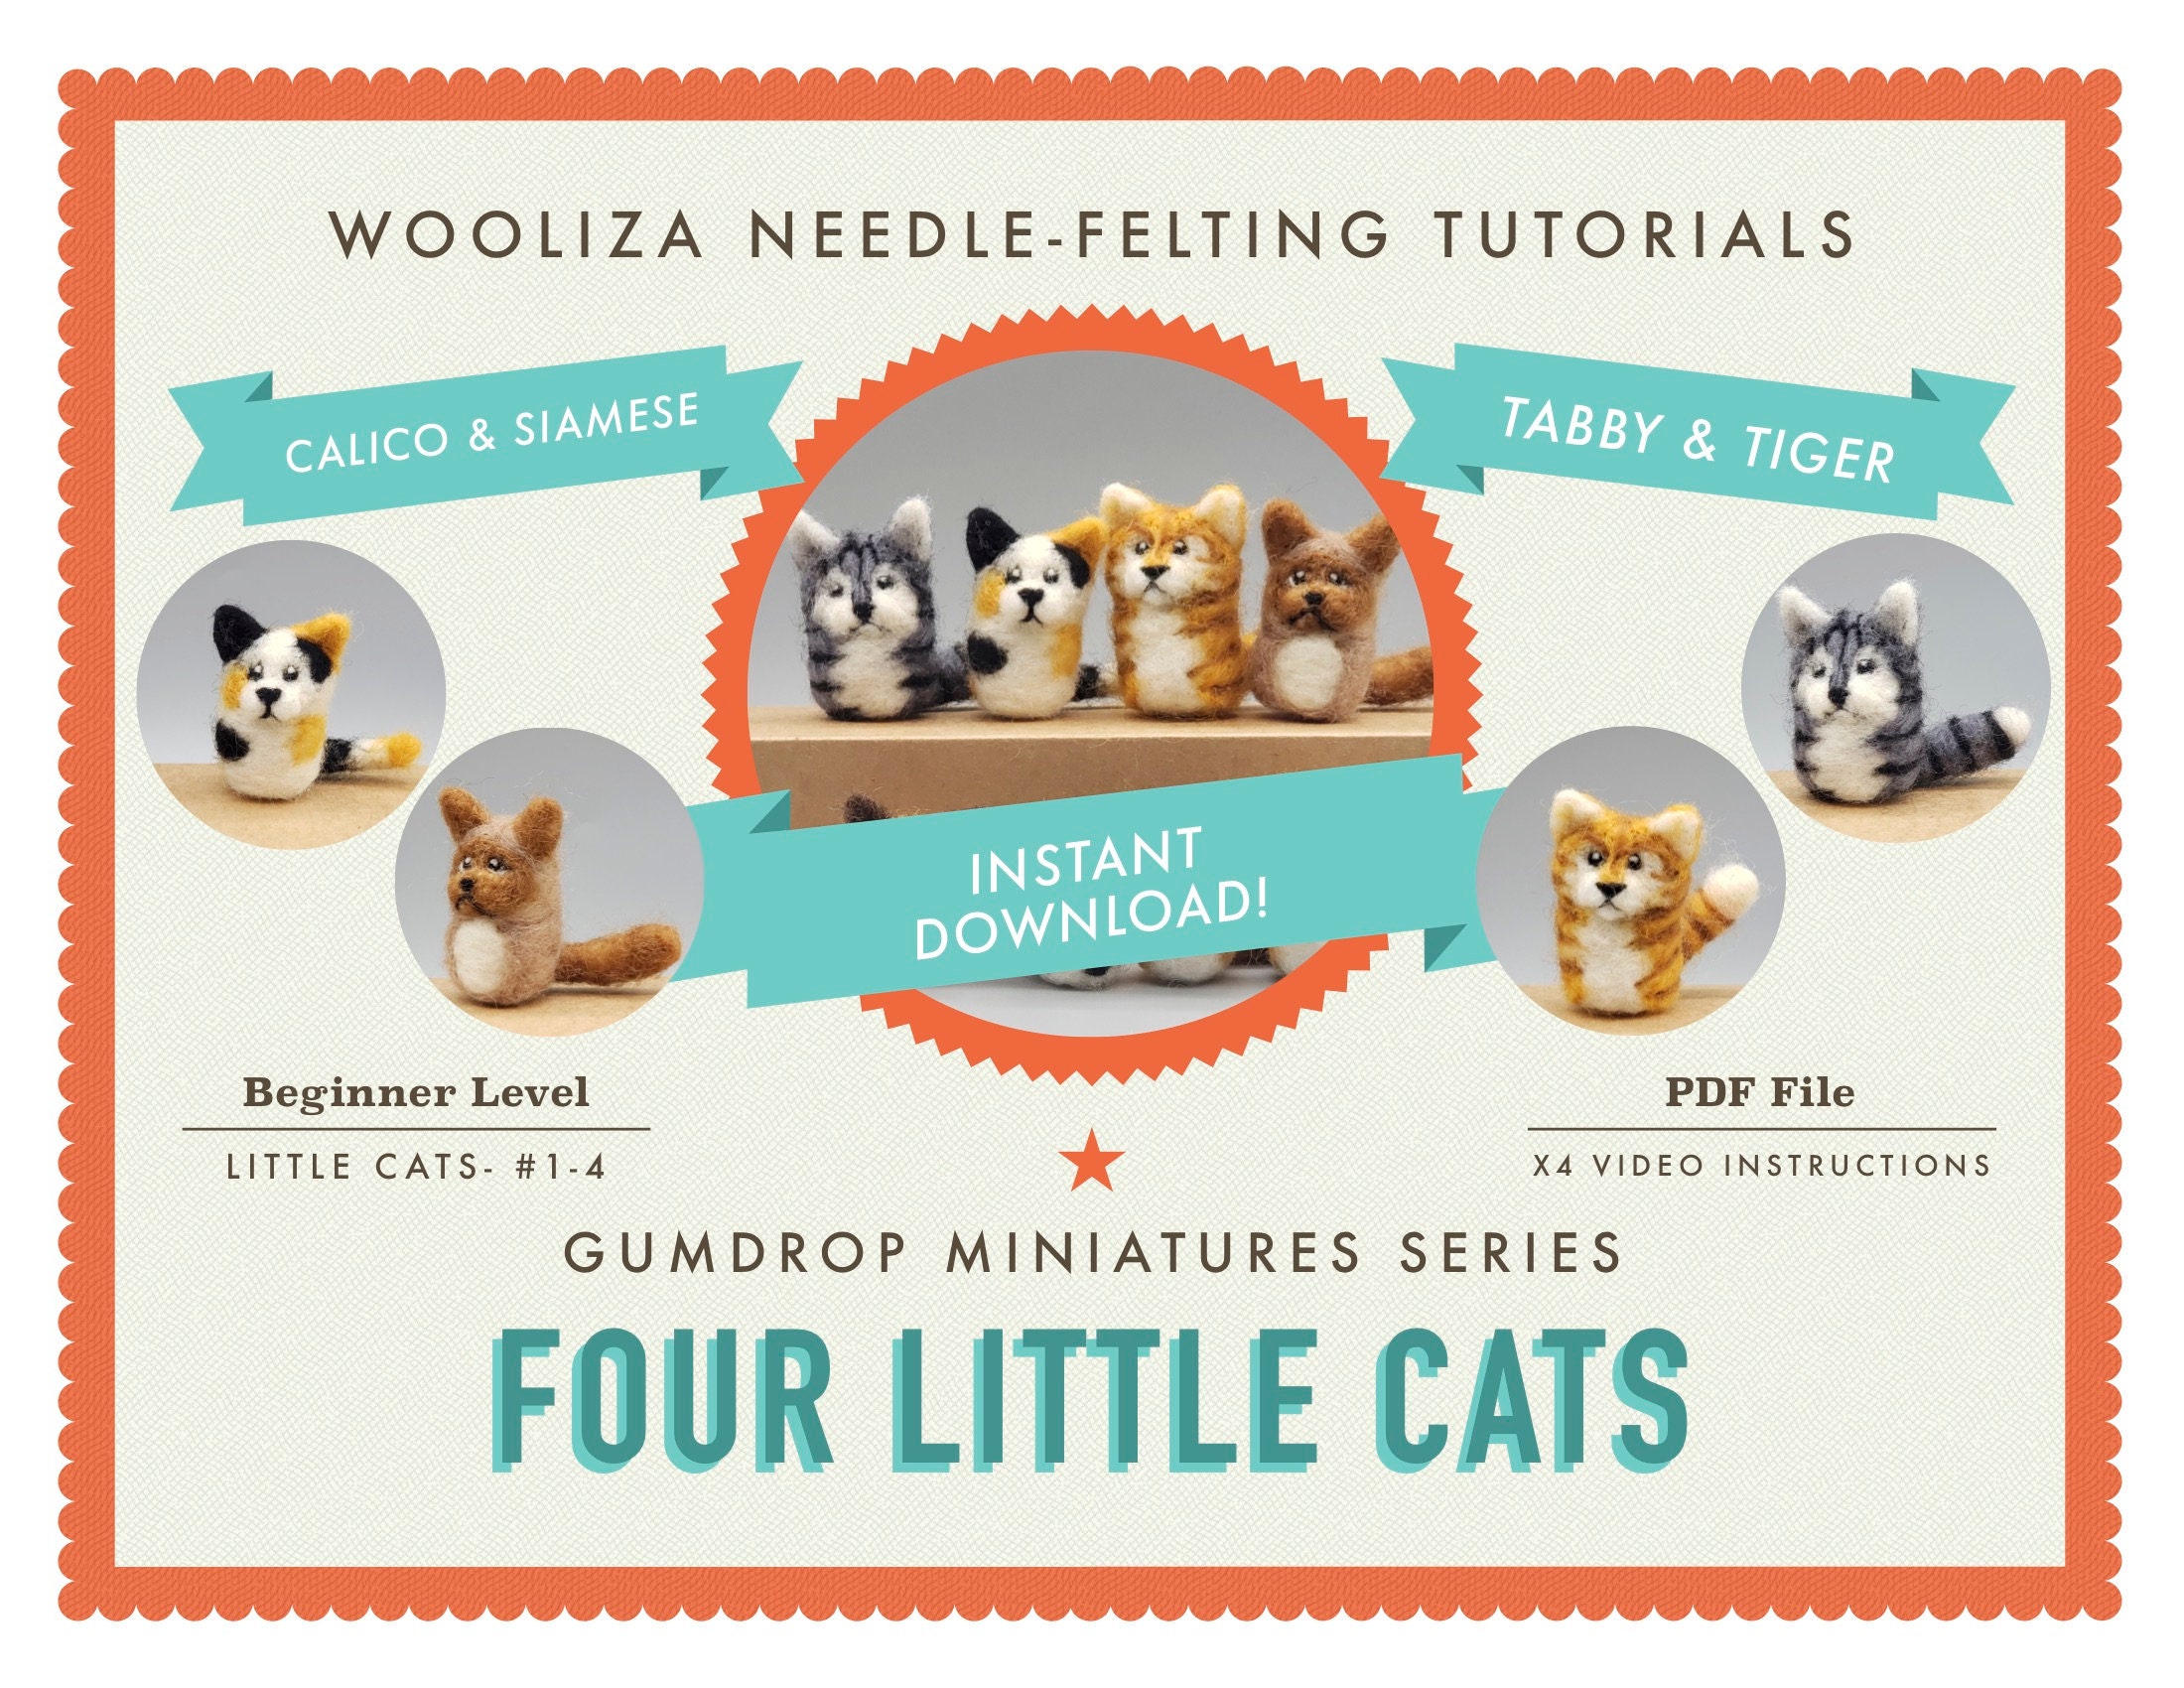 eQuilter Needle Felting Kit - Cute Dogs - TEXT IN JAPANESE